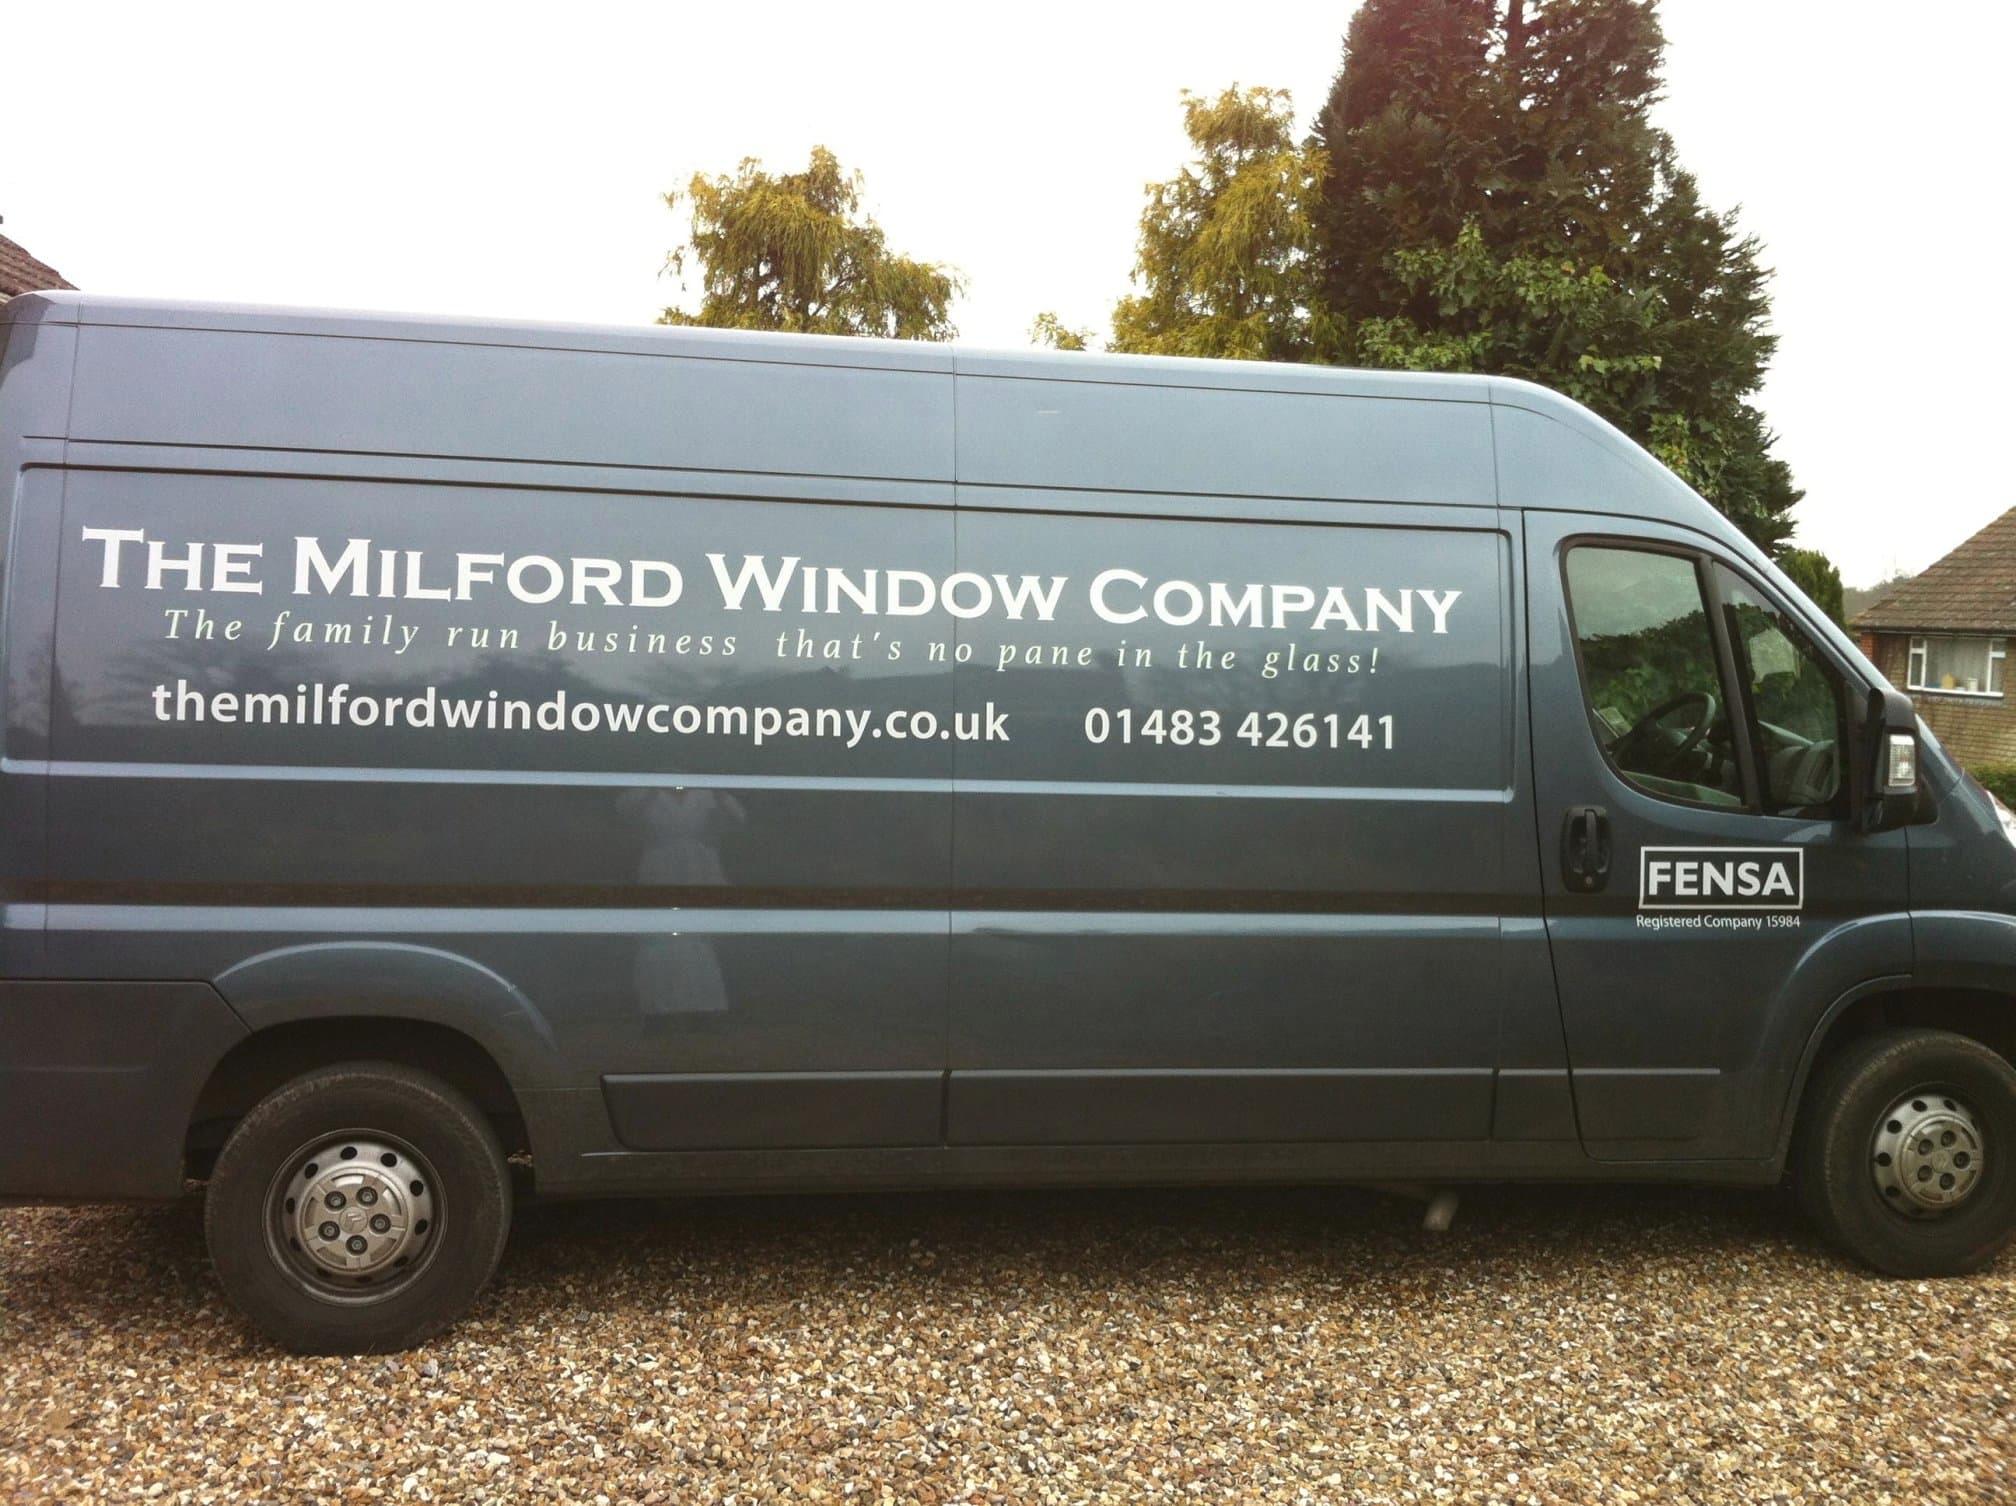 Images The Milford Window Company